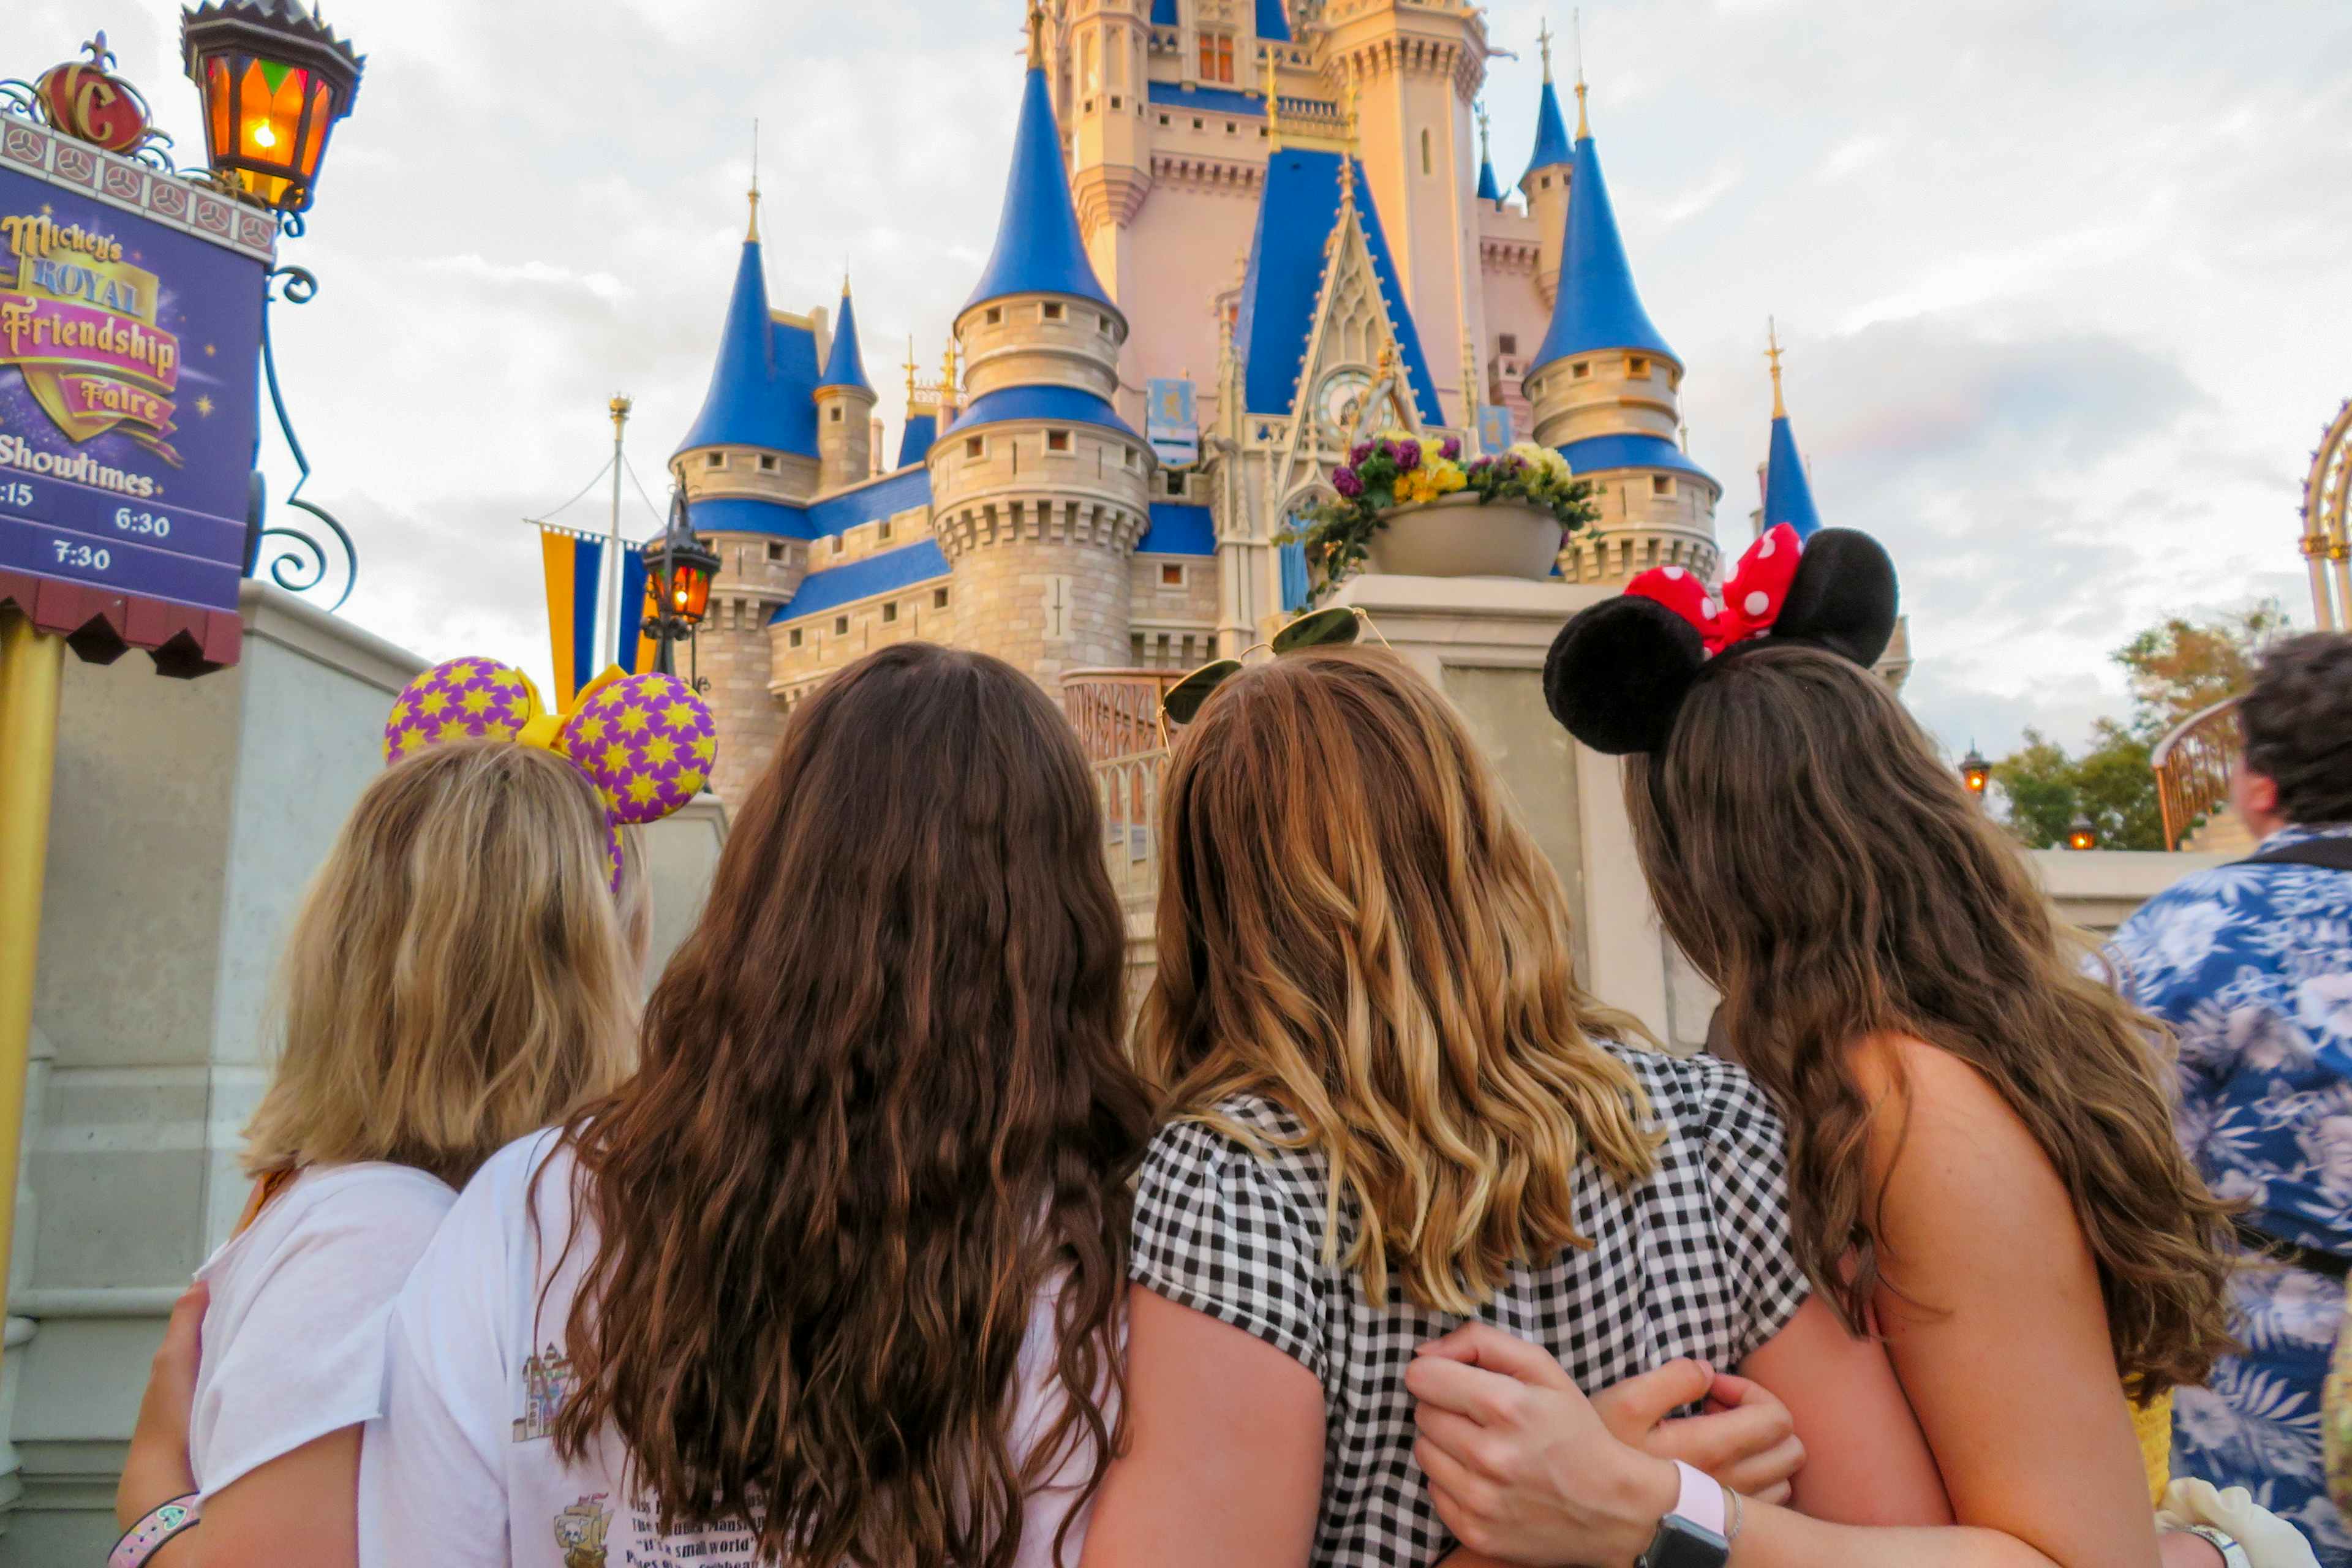 four friends hugging each other in front of the magic kingdom castle at disney world